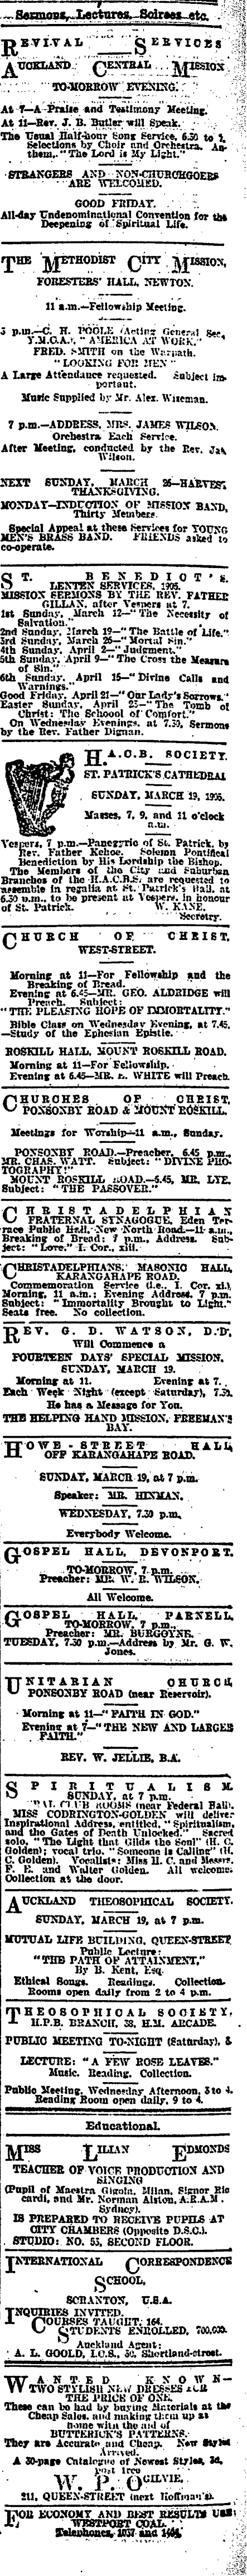 Papers Past Newspapers New Zealand Herald 18 March 1905 Page 2 Advertisements Column 8